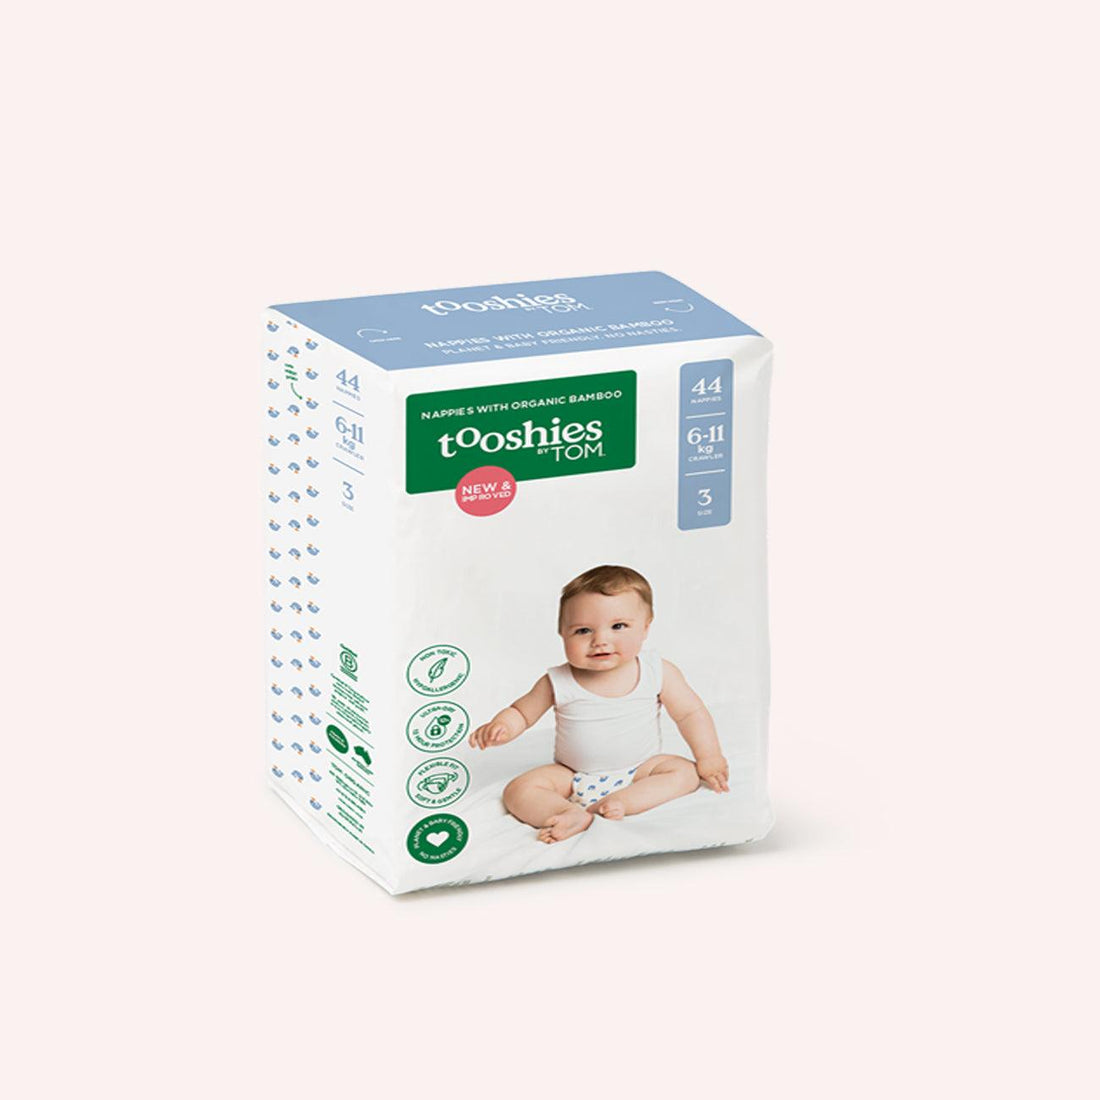 Crawler Bamboo Nappies Size 3 (6-11kg) - 44 pack